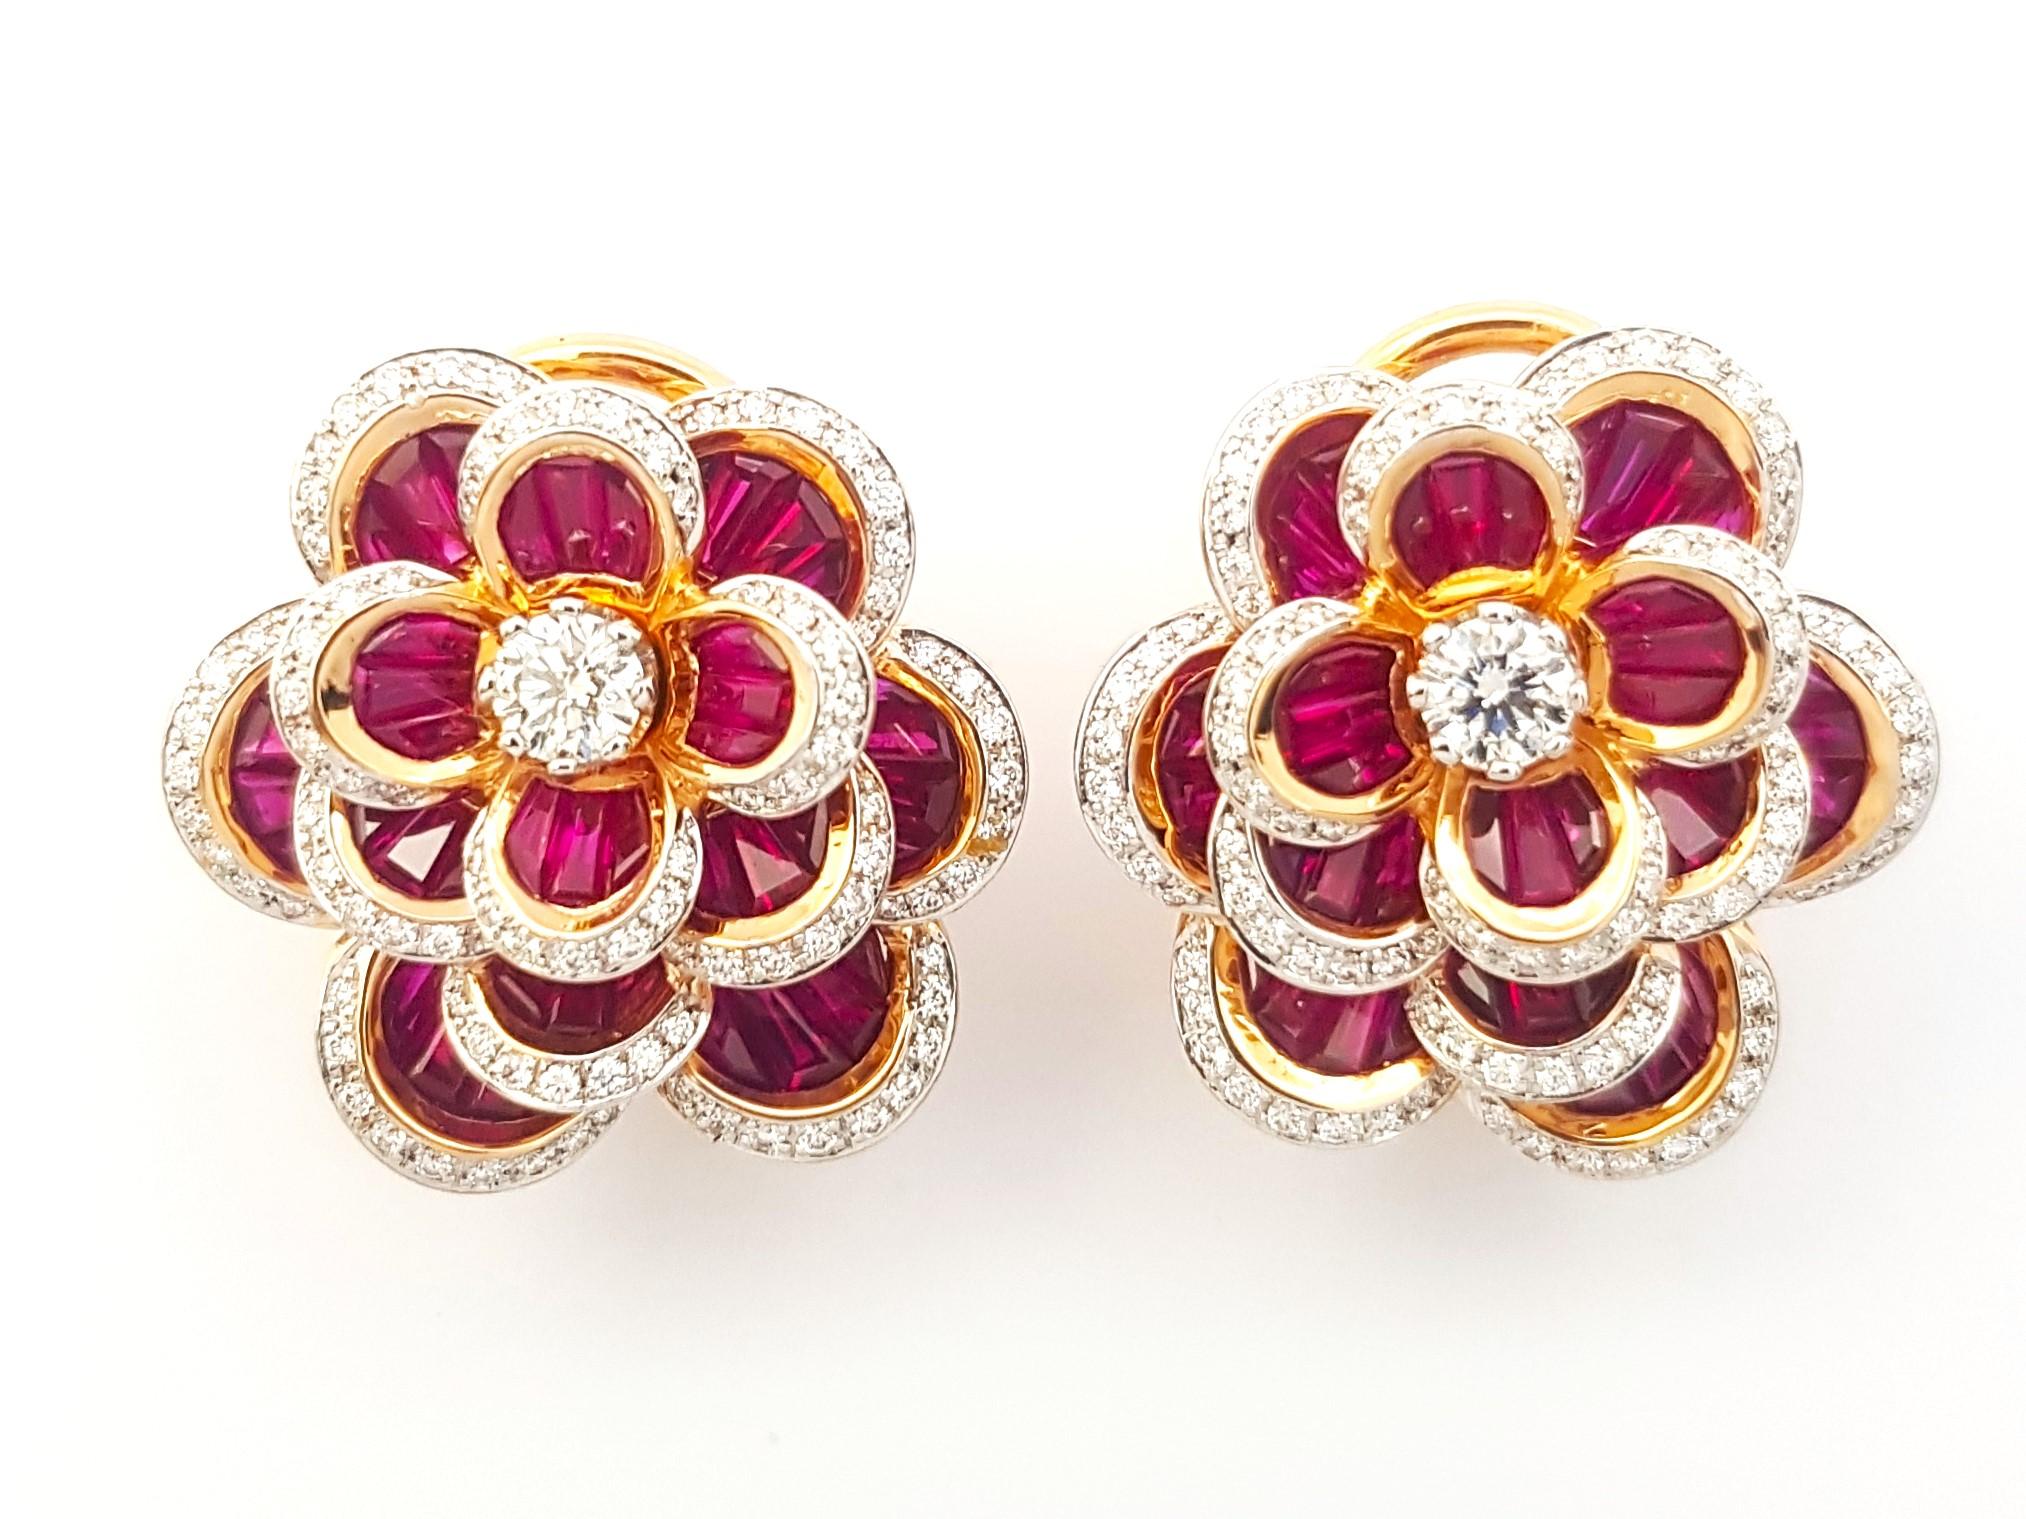 Ruby 13.97 carats with Diamond 1.19 carats Earrings set in 18 Karat Rose Gold Settings

Width: 2.2 cm 
Length: 2.2 cm
Total Weight: 23.58 grams

